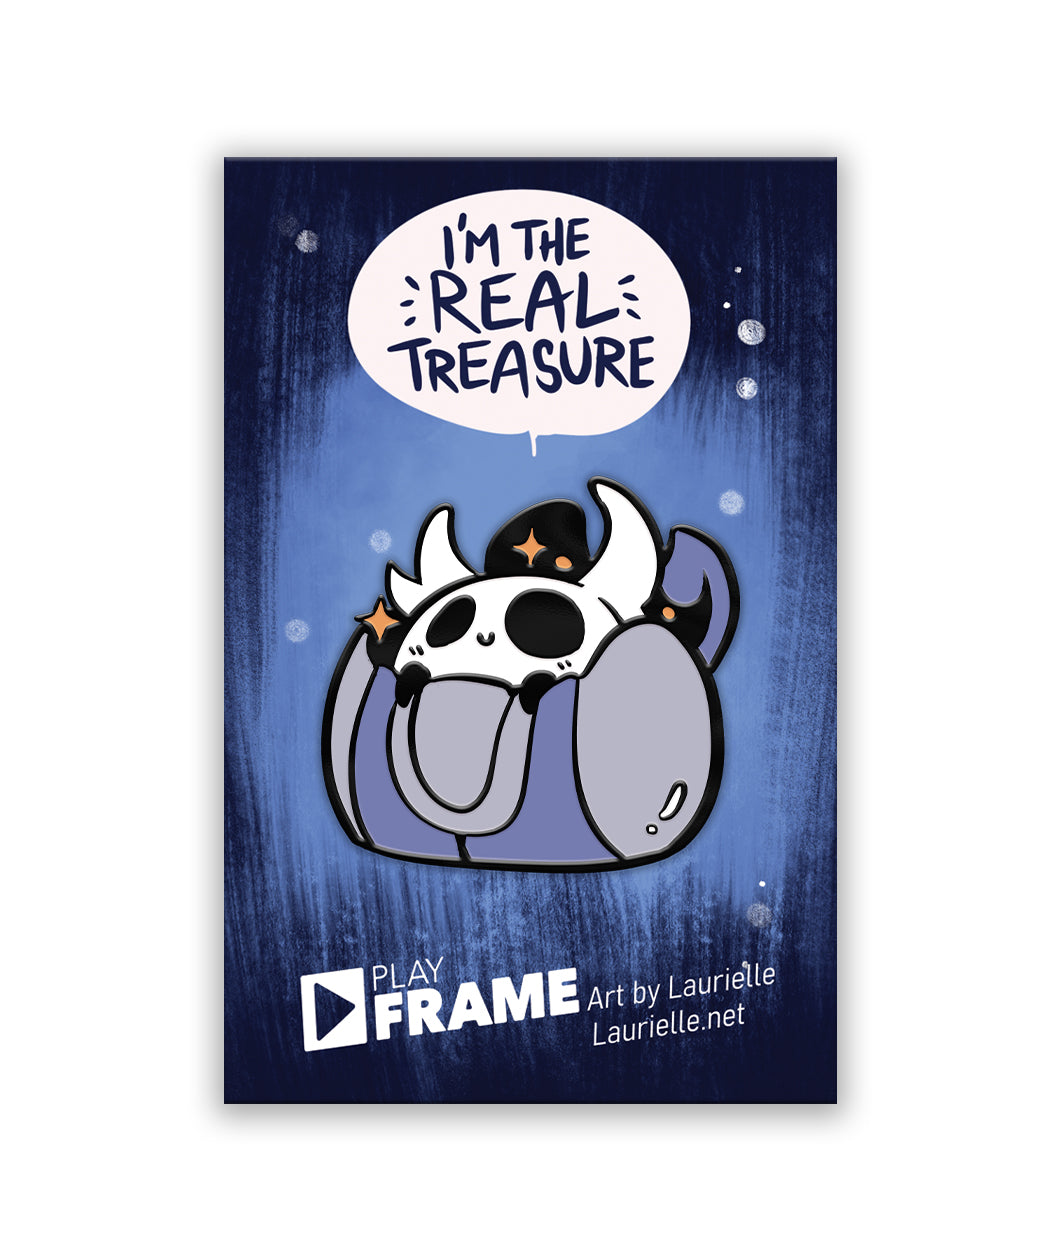 A blue pin backing that has a text bubble that says "I'm the real treasure" above a blue, black and white pin with the text PlayFrame. 